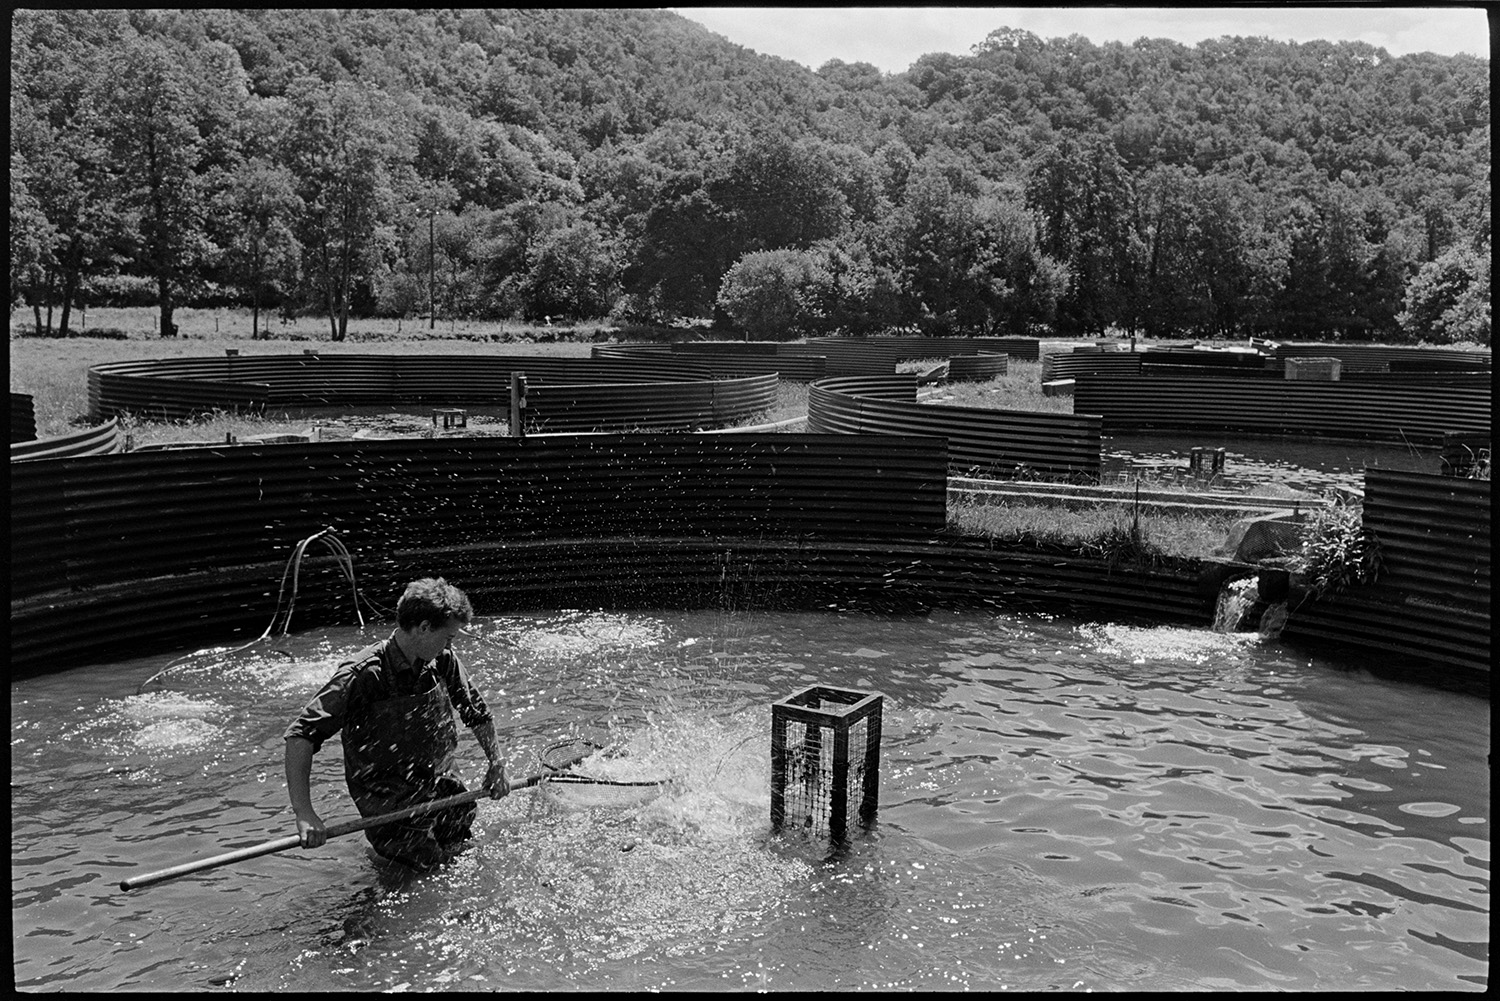 Catching fish at fish farm ponds. 
[A man catching fish with a large net in a circular pond with corrugated iron sides at a fish farm at Head Mill, Kings Nympton. Other pond can be seen in the background with woodland beyond.]